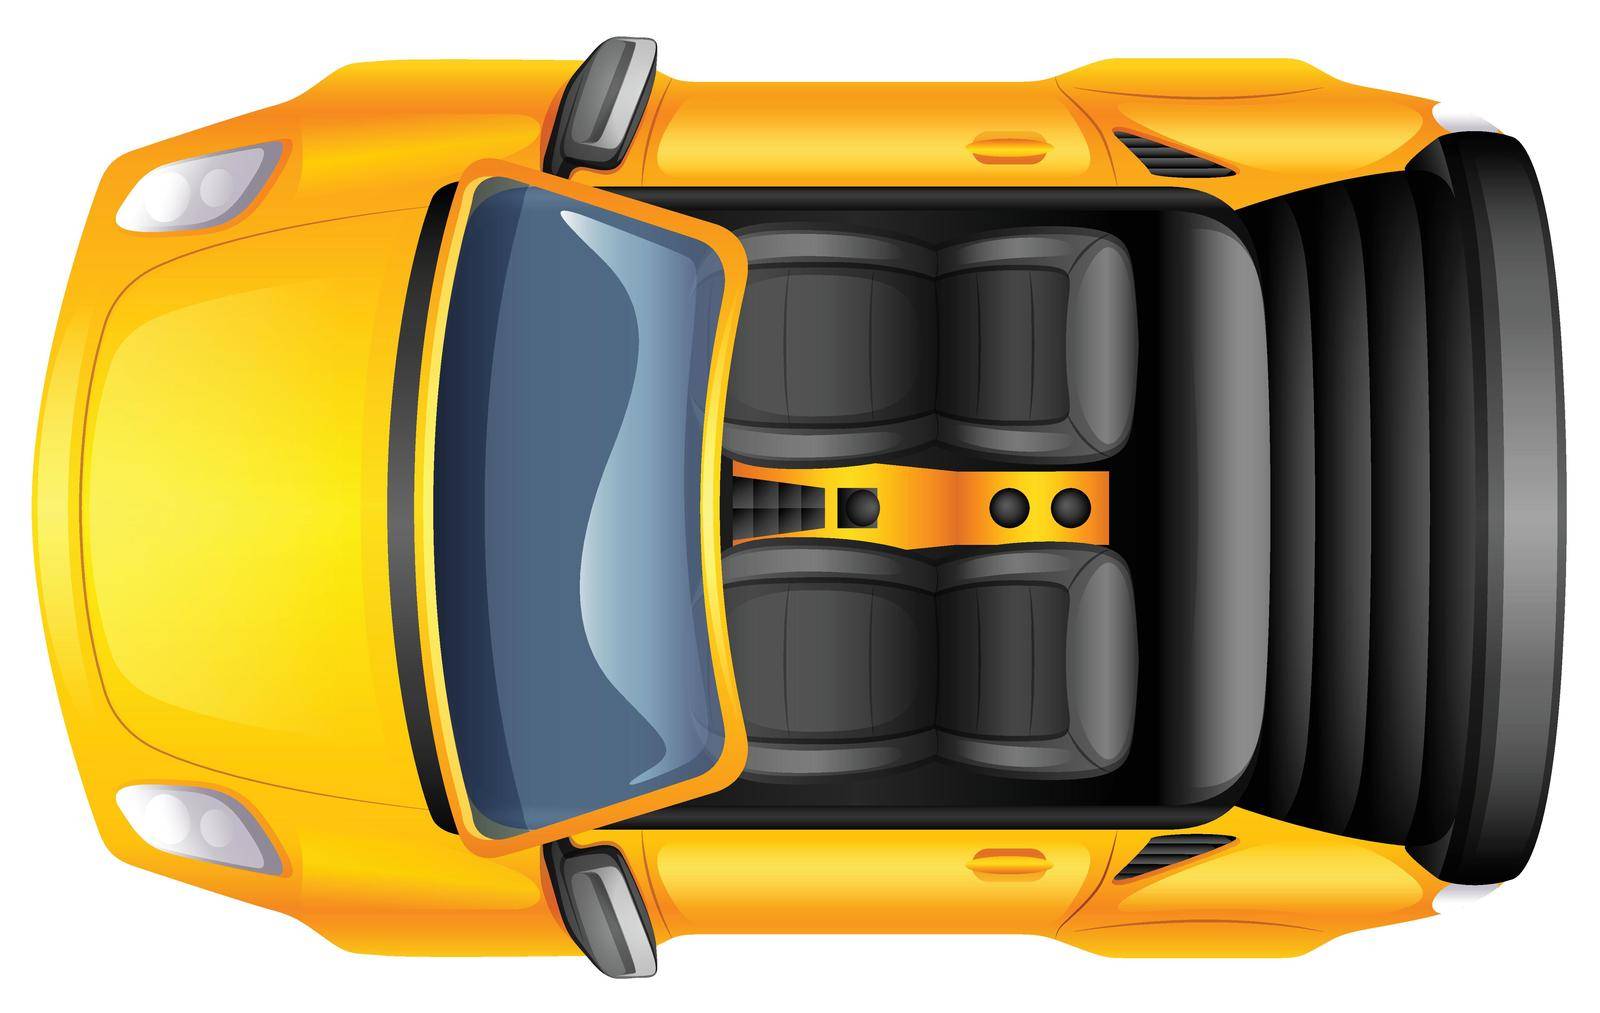 Illustration of a yellow sportscar on a white background